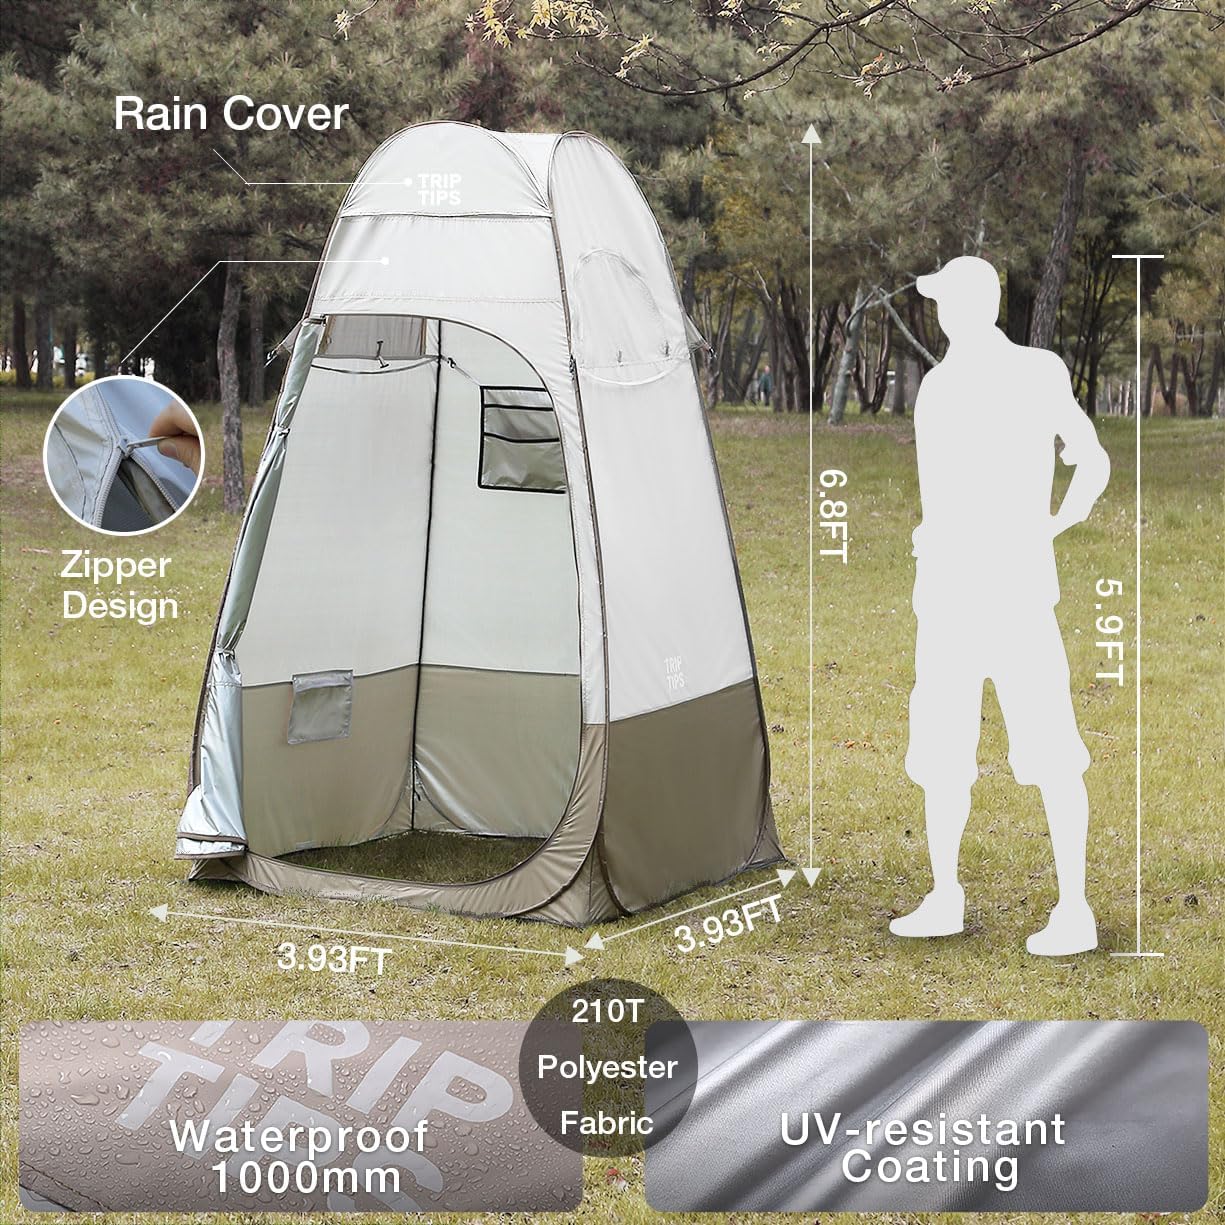 TRIPTIPS Pop Up Shower Tent with Floor Changing Tent with Mesh Window 6.9 FT Privacy Tent for Portable Toilet Outdoor Portable Dressing Room, Removable Rain Cover/UPF 50+ (Green)